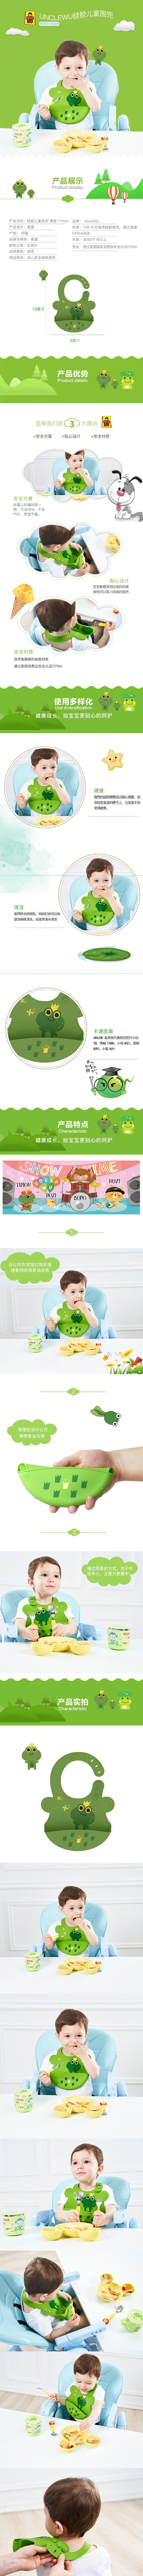 Waterproof Silicone Bib Easily Wipes Clean! & TIMON The Frog Silicone Baby Bibs ! 100% Food Grade Silicone Bibs